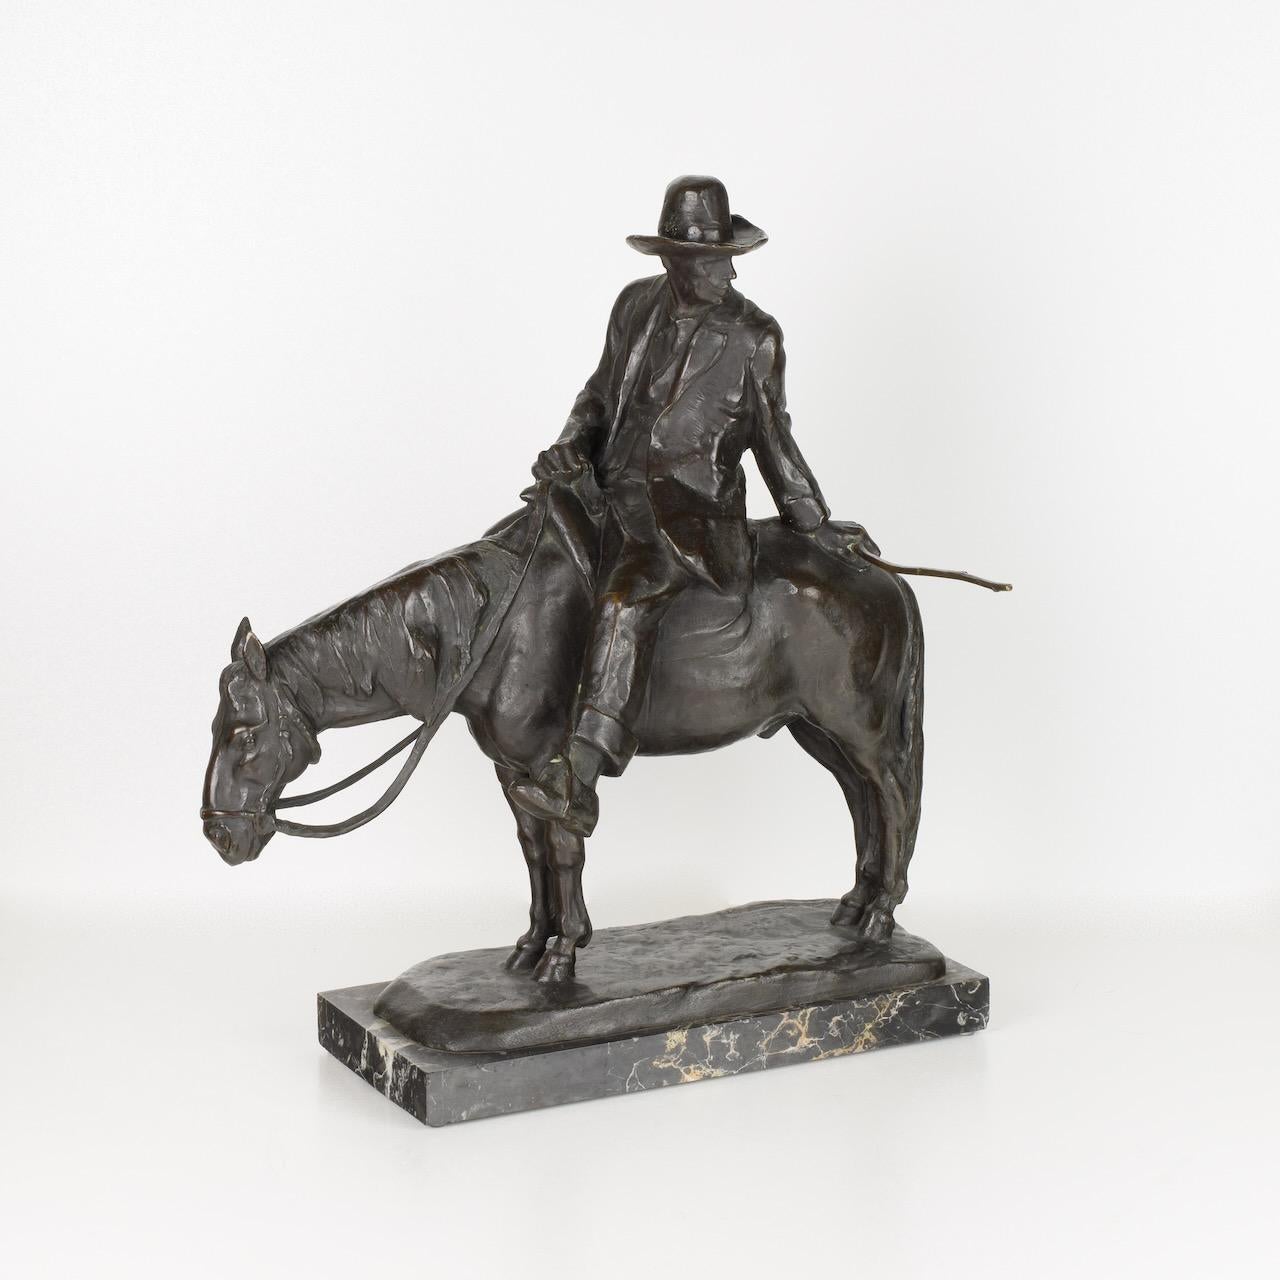 Giulio Cipriani (1887-1956)
Sculpture In dark patina bronze with black marble base.
Dimensions cm W44 x D29 x H50 approx.